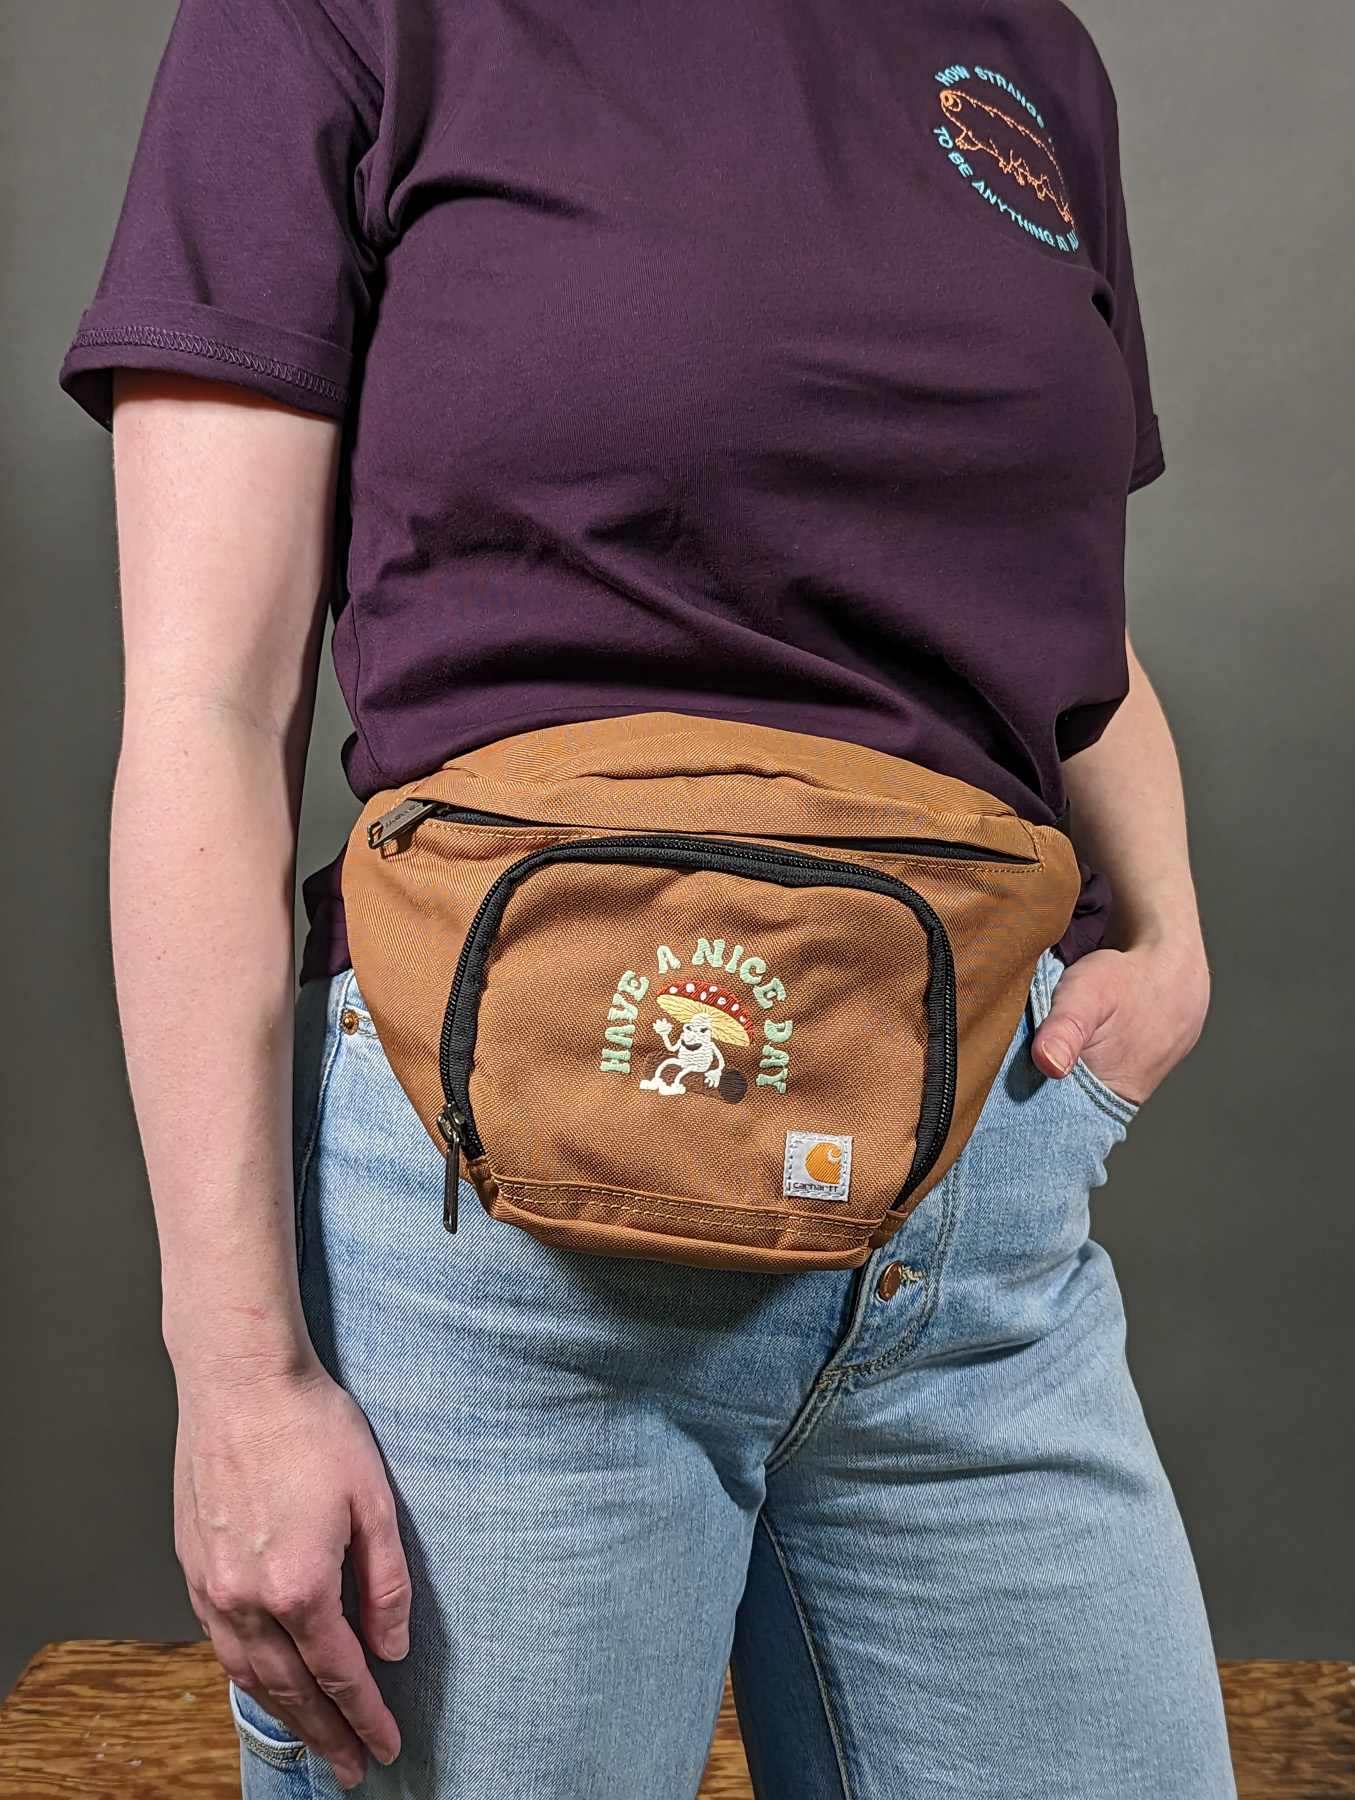 pensum Klage Polering Have a Nice Day Fanny Pack - Crewel and Unusual